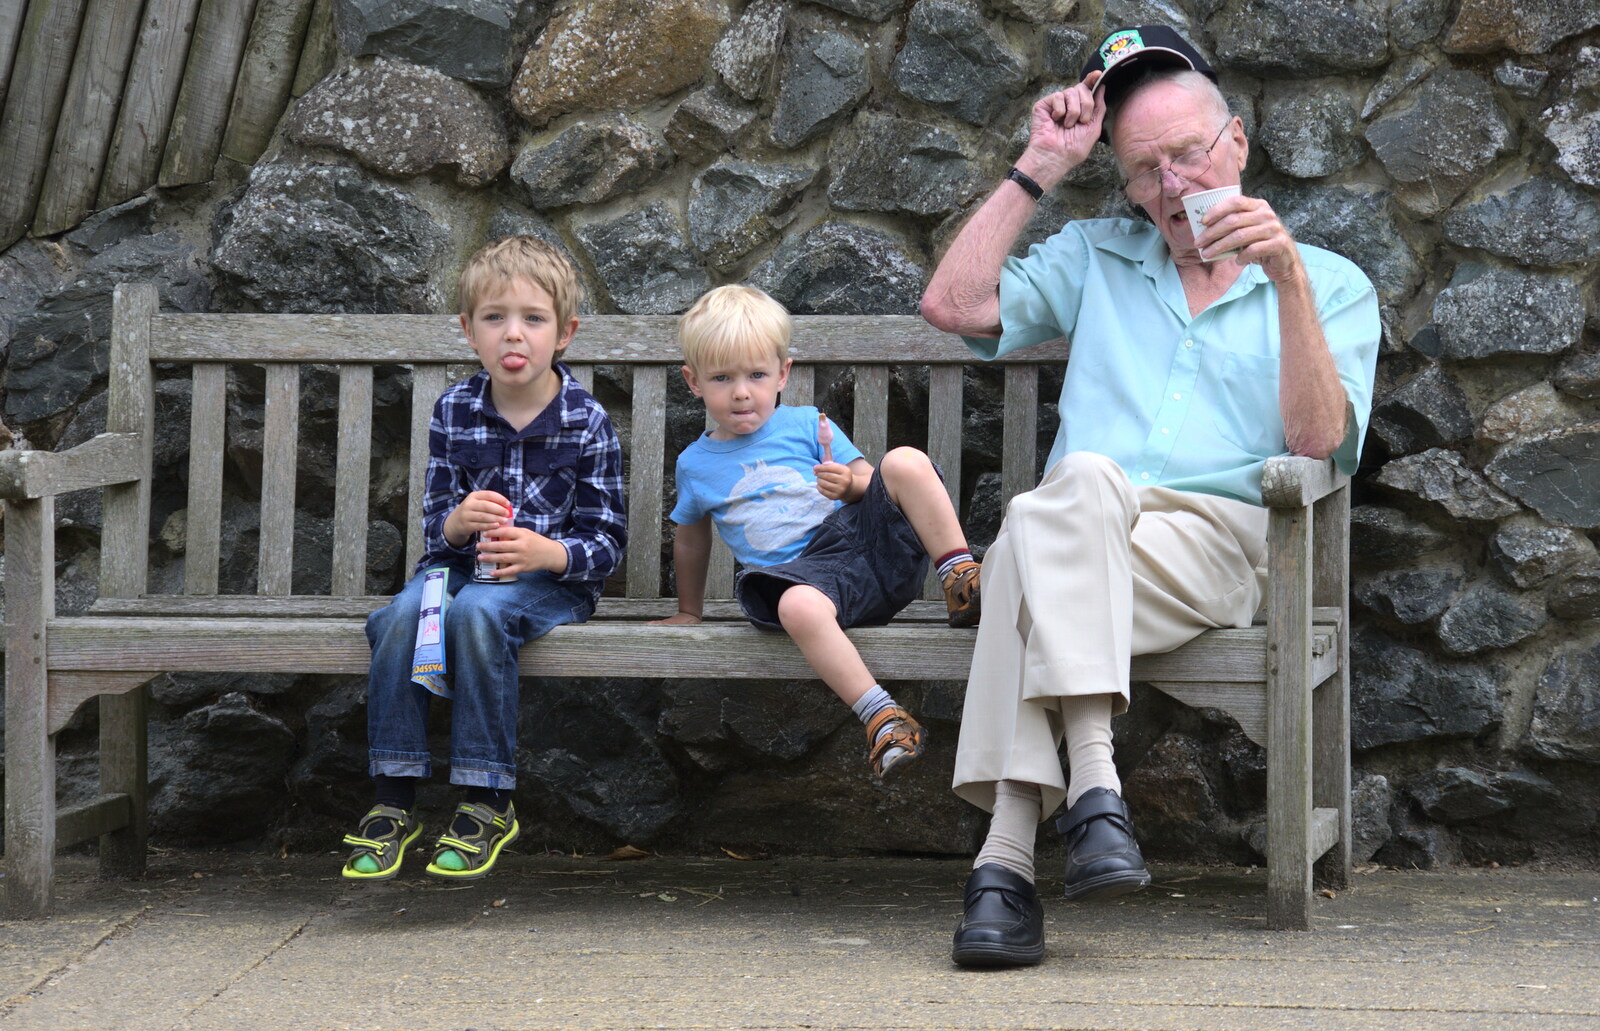 A Birthday Trip to the Zoo, Banham, Norfolk - 26th May 2014: The boys have a bit of a sit down